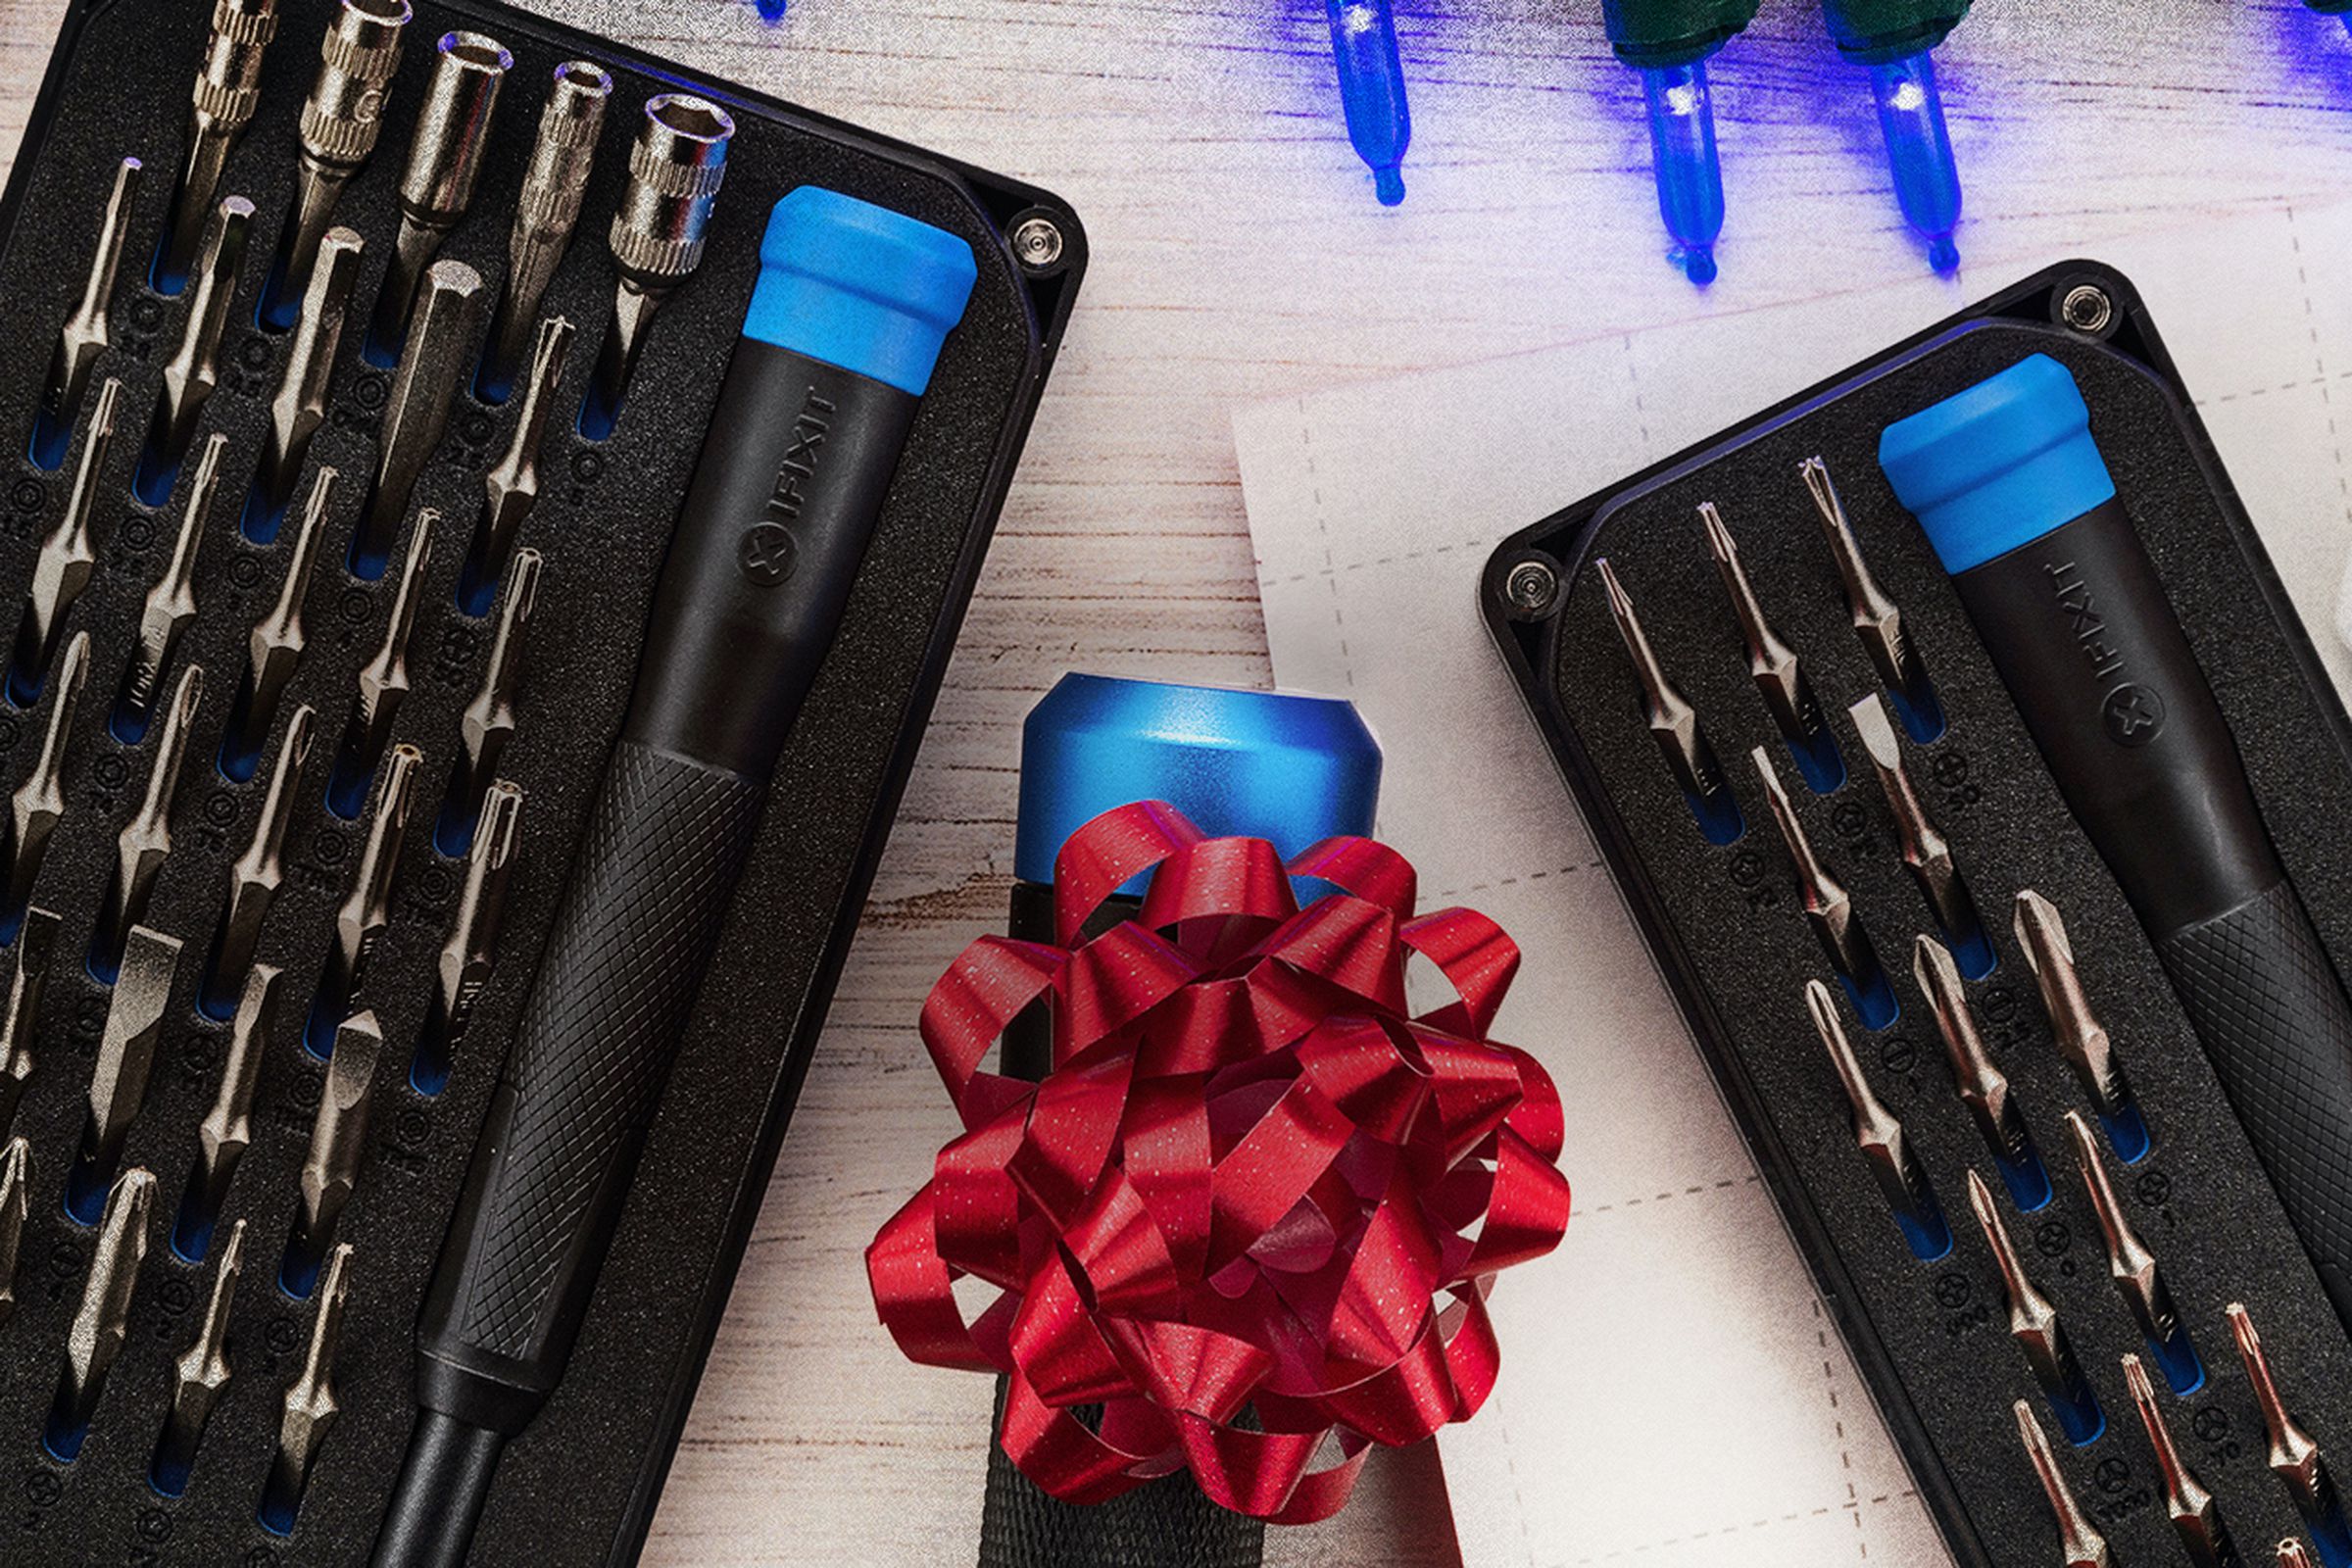 An image of the two new iFixit kits, with a screwdriver wrapped in a bow between them